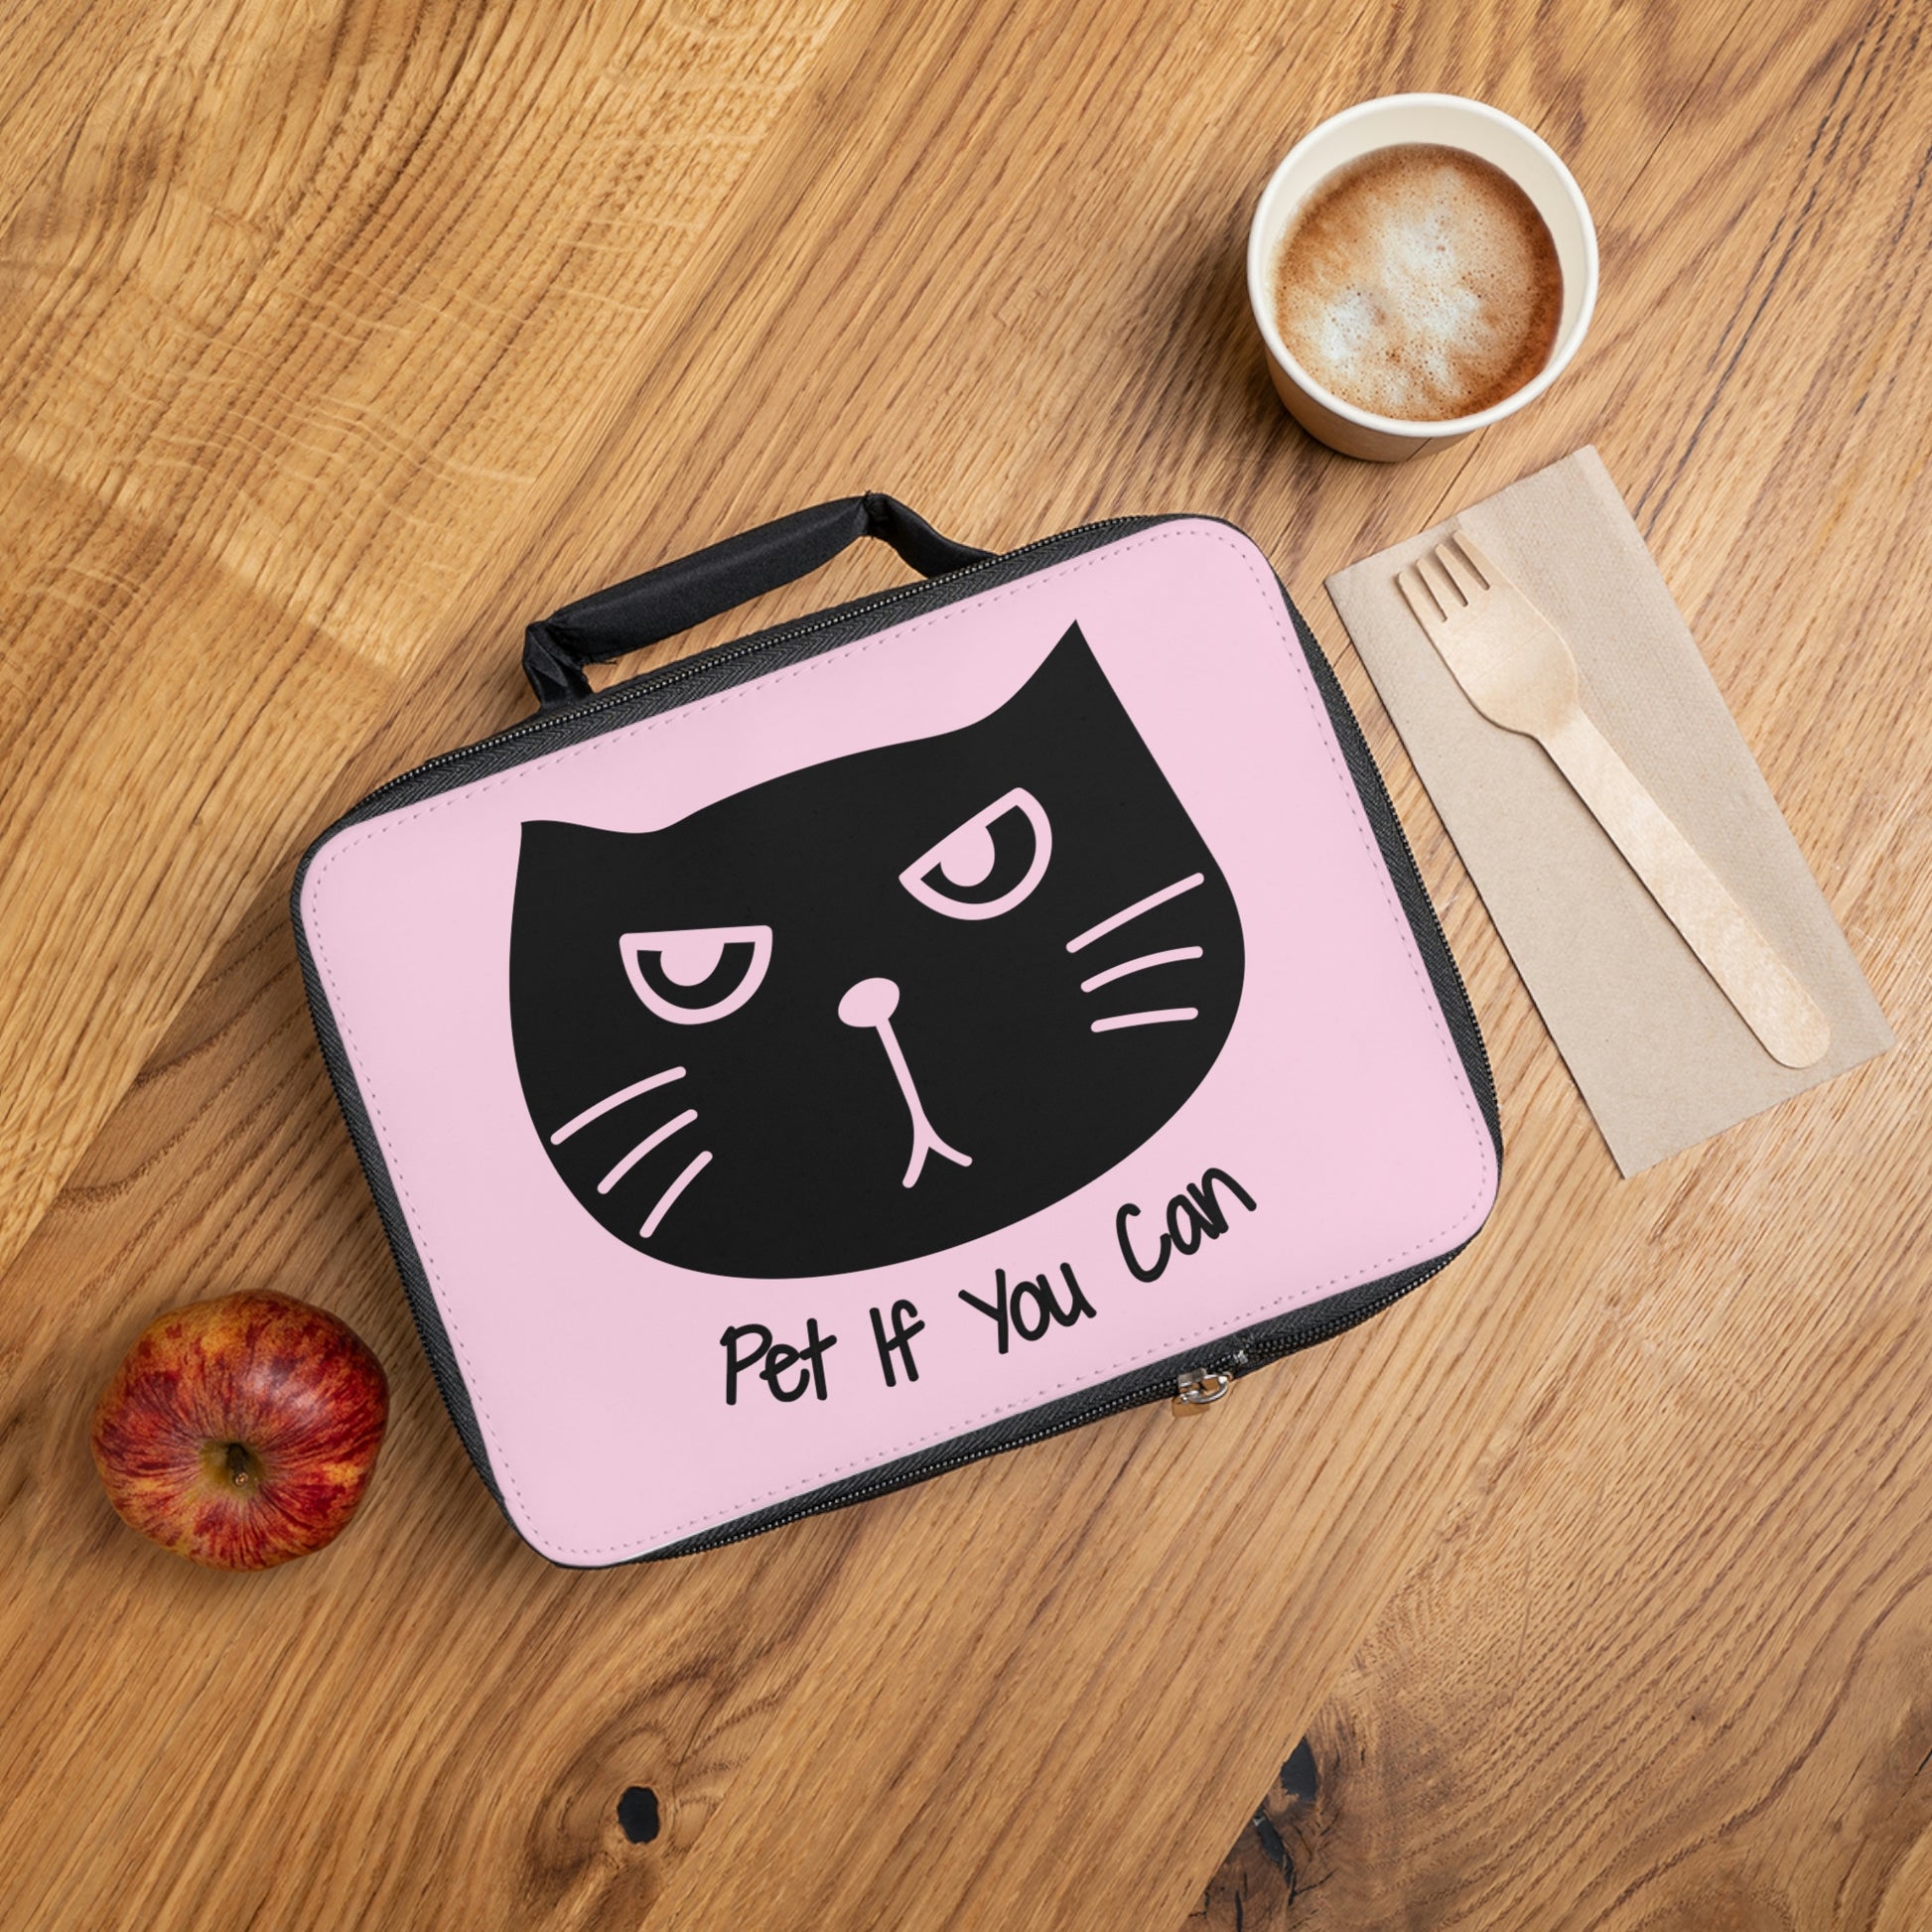 Funny cat pink Lunch Bag, Black cat says "Pet if you can" pink Lunch Bag, kawaii cute cat lunch tote, cat lovers gift, back to school